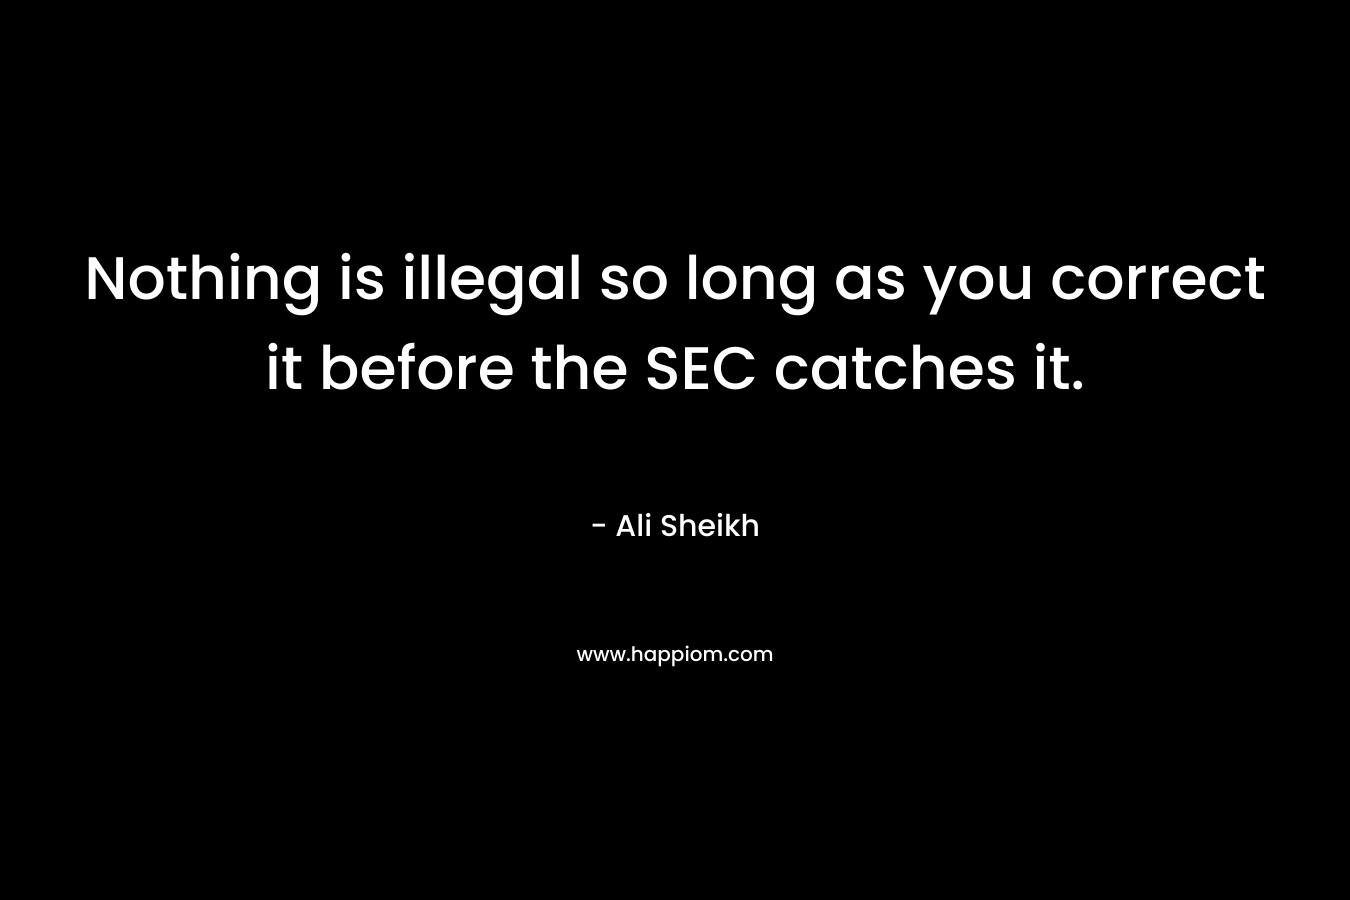 Nothing is illegal so long as you correct it before the SEC catches it. – Ali Sheikh